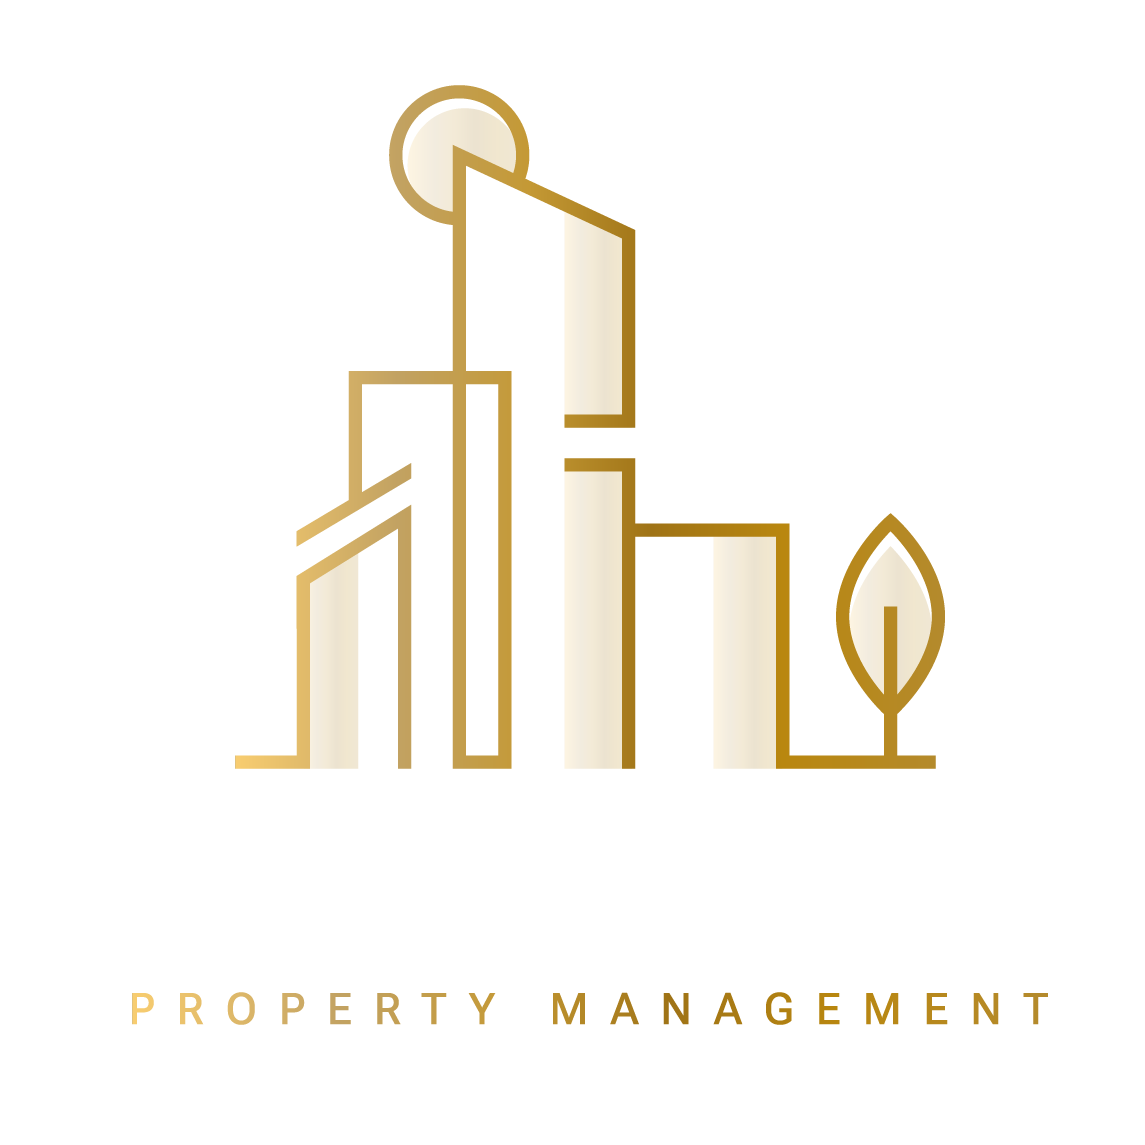 Priceless Property Management